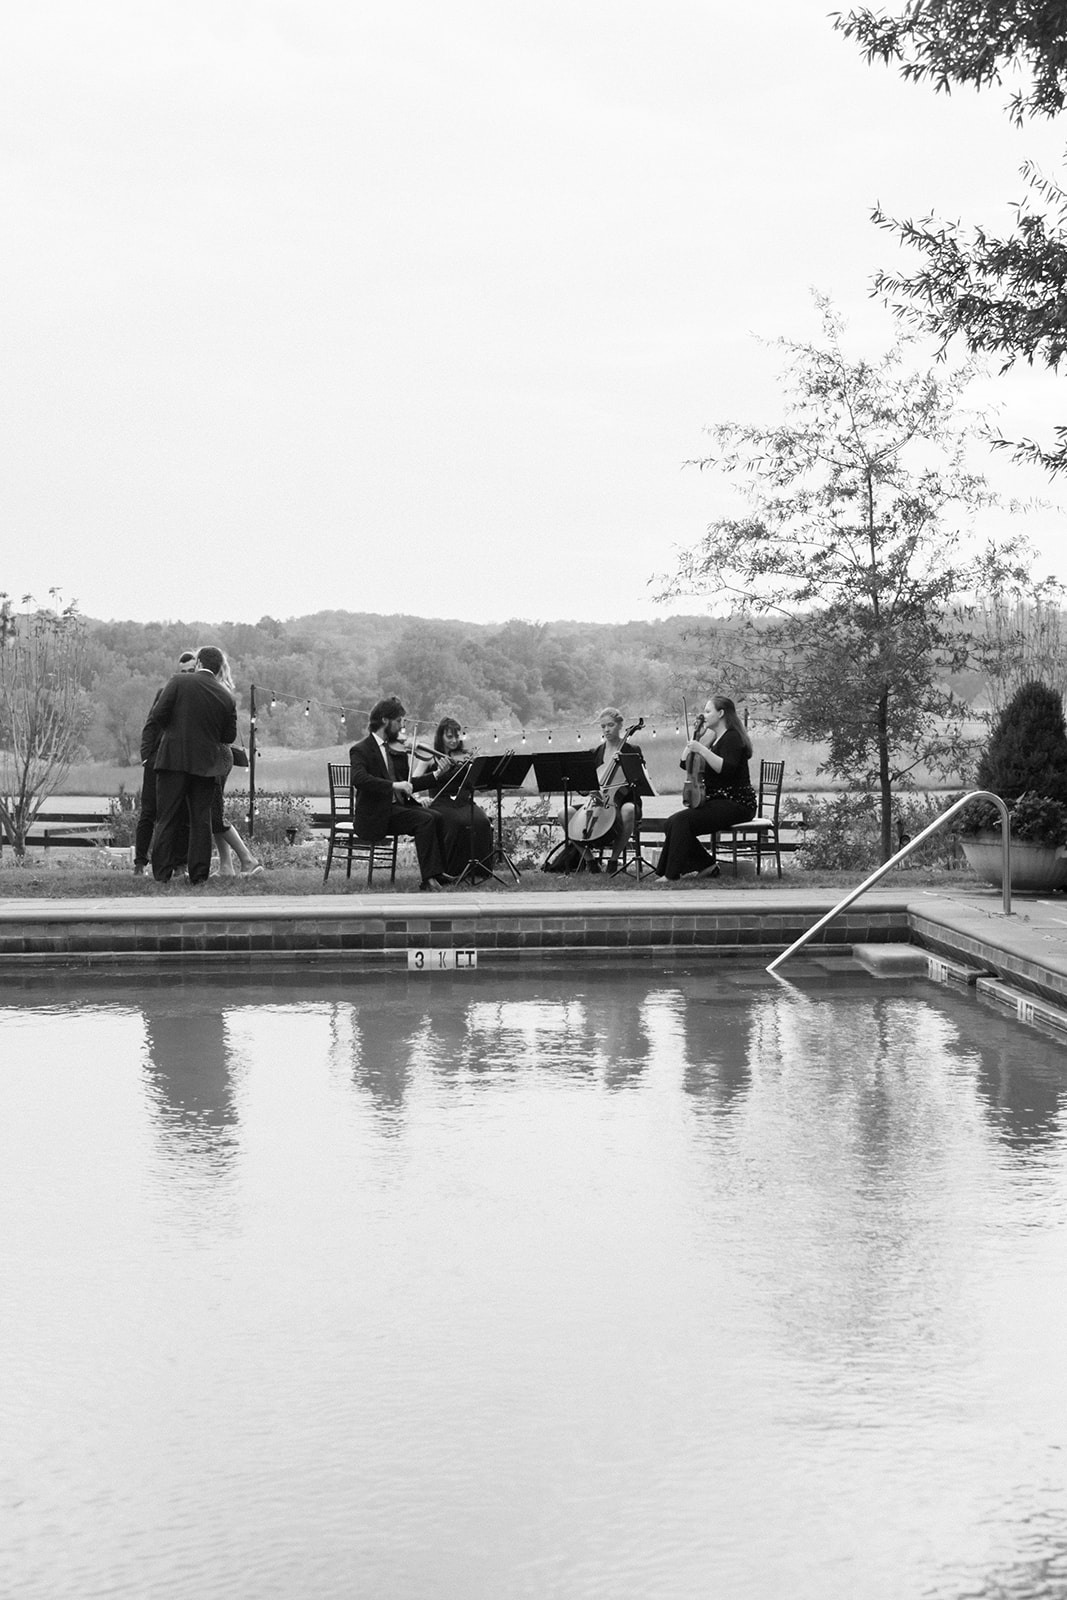 String quartet playing music at Goodstone cocktail hour